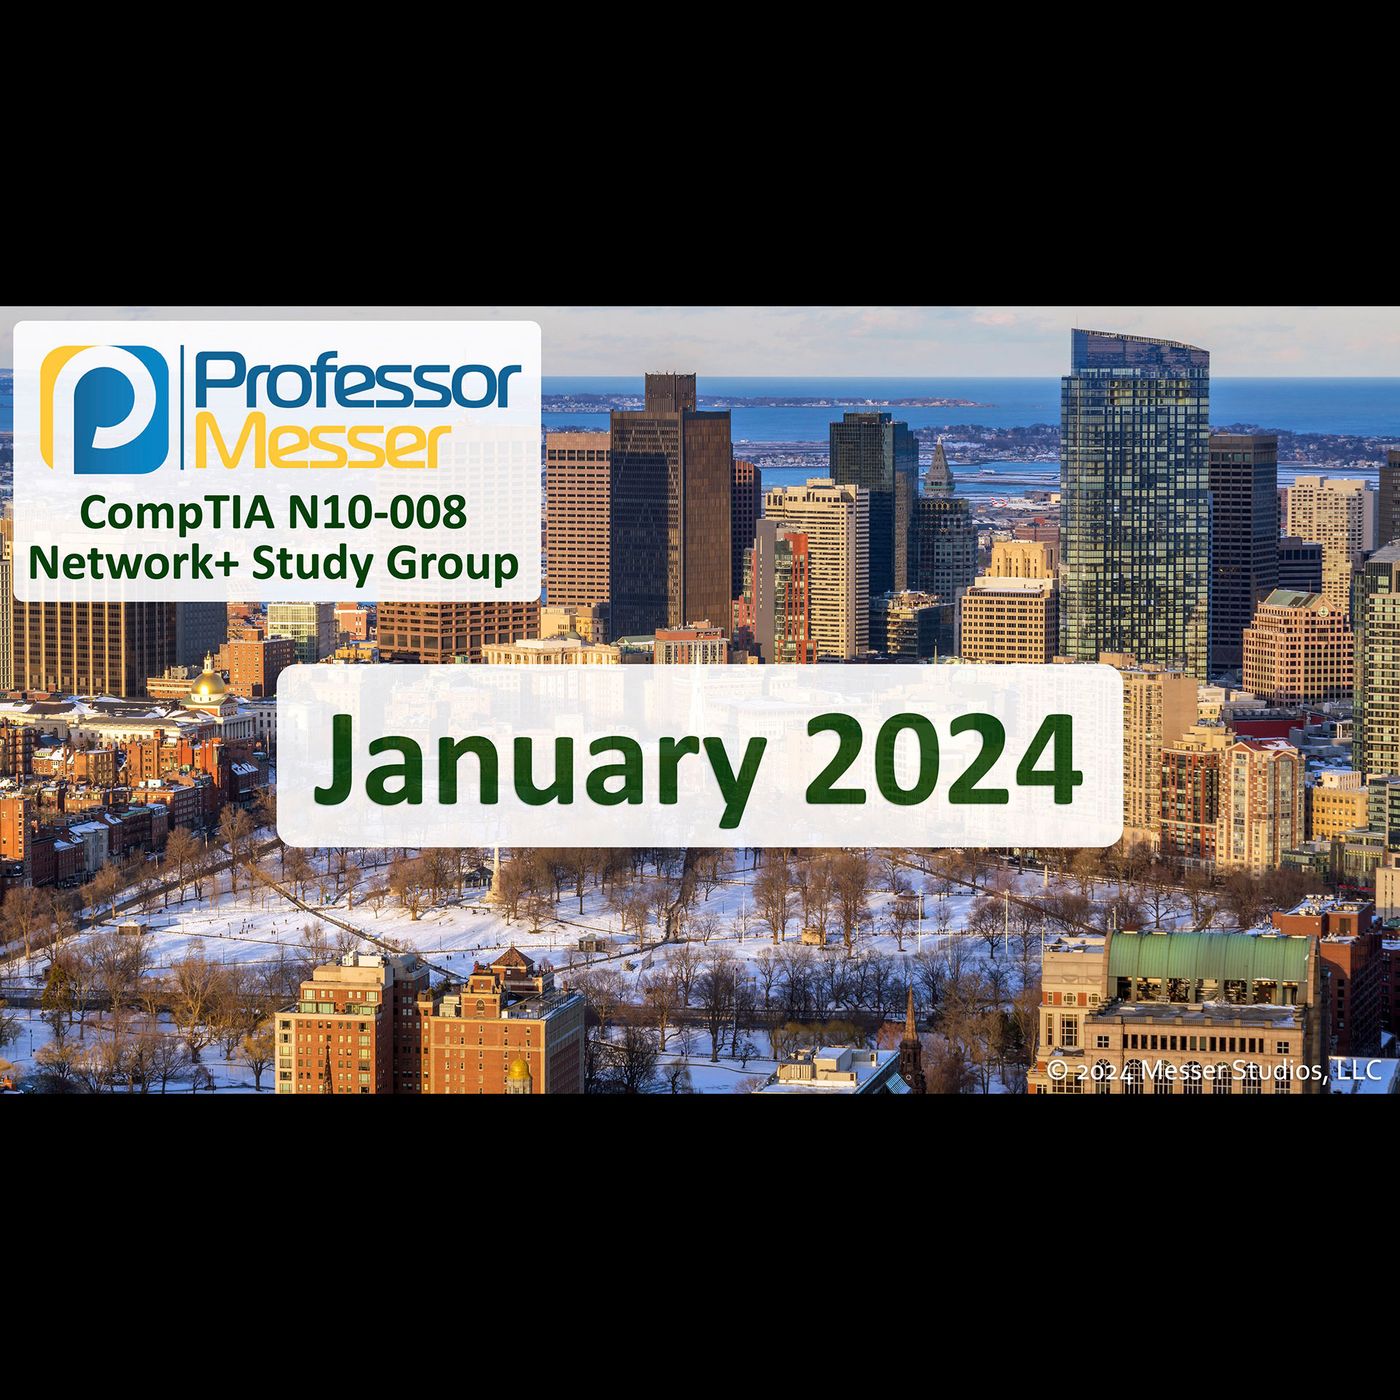 Professor Messer's N10-008 Network+ Study Group After Show - January 2024